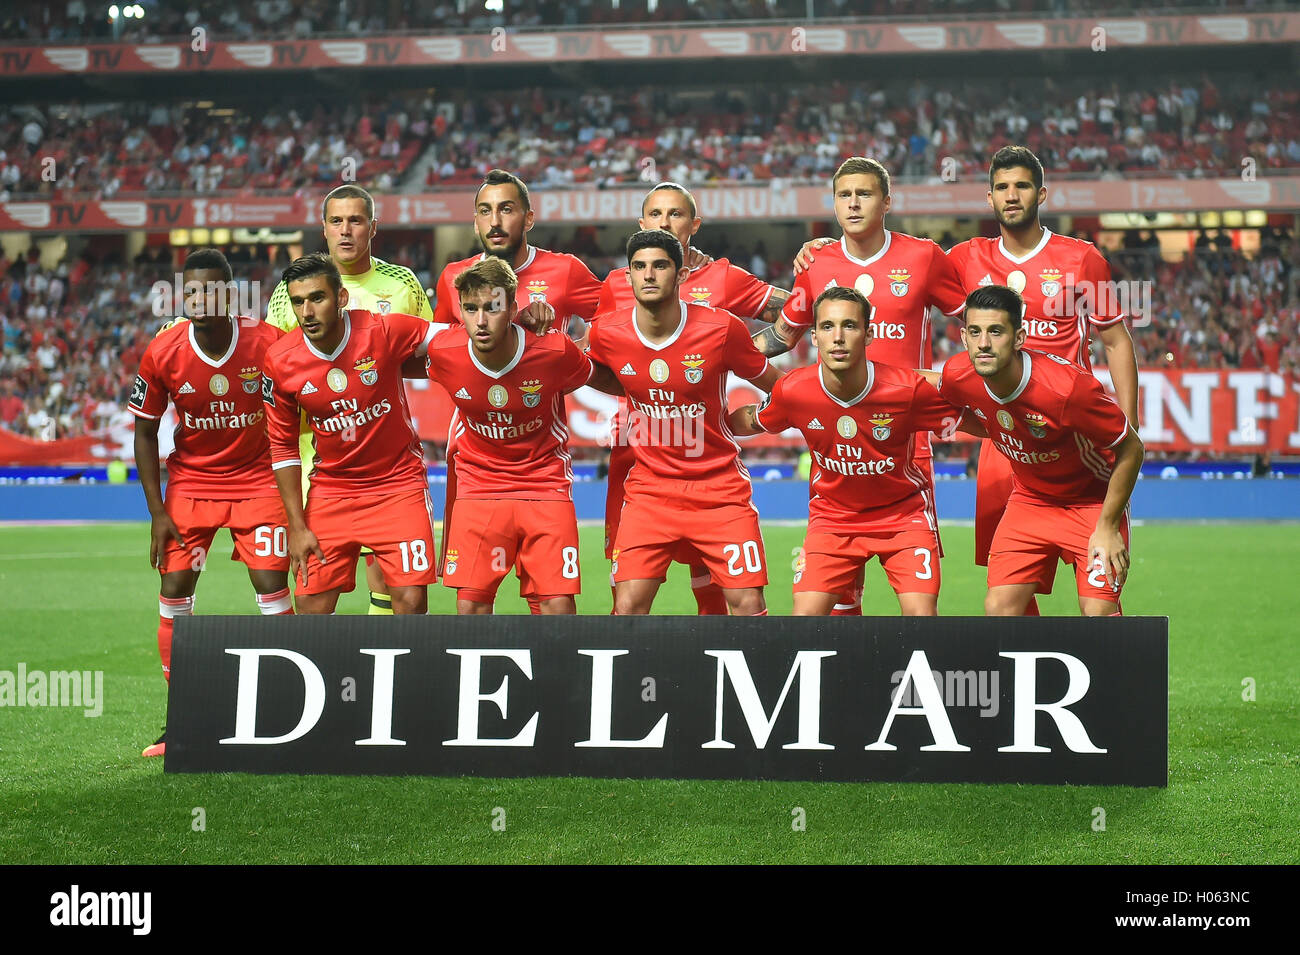 Portugal, Lisbon,Sep. 19,2016 -  PORTUGUESE FOOTBALL -  Benfica team in action during Portuguese First League match between Benfica and Braga at Luz Stadium, in Lisbon, Portugal. Photo: Bruno de Carvalho/Alamy Live News Stock Photo